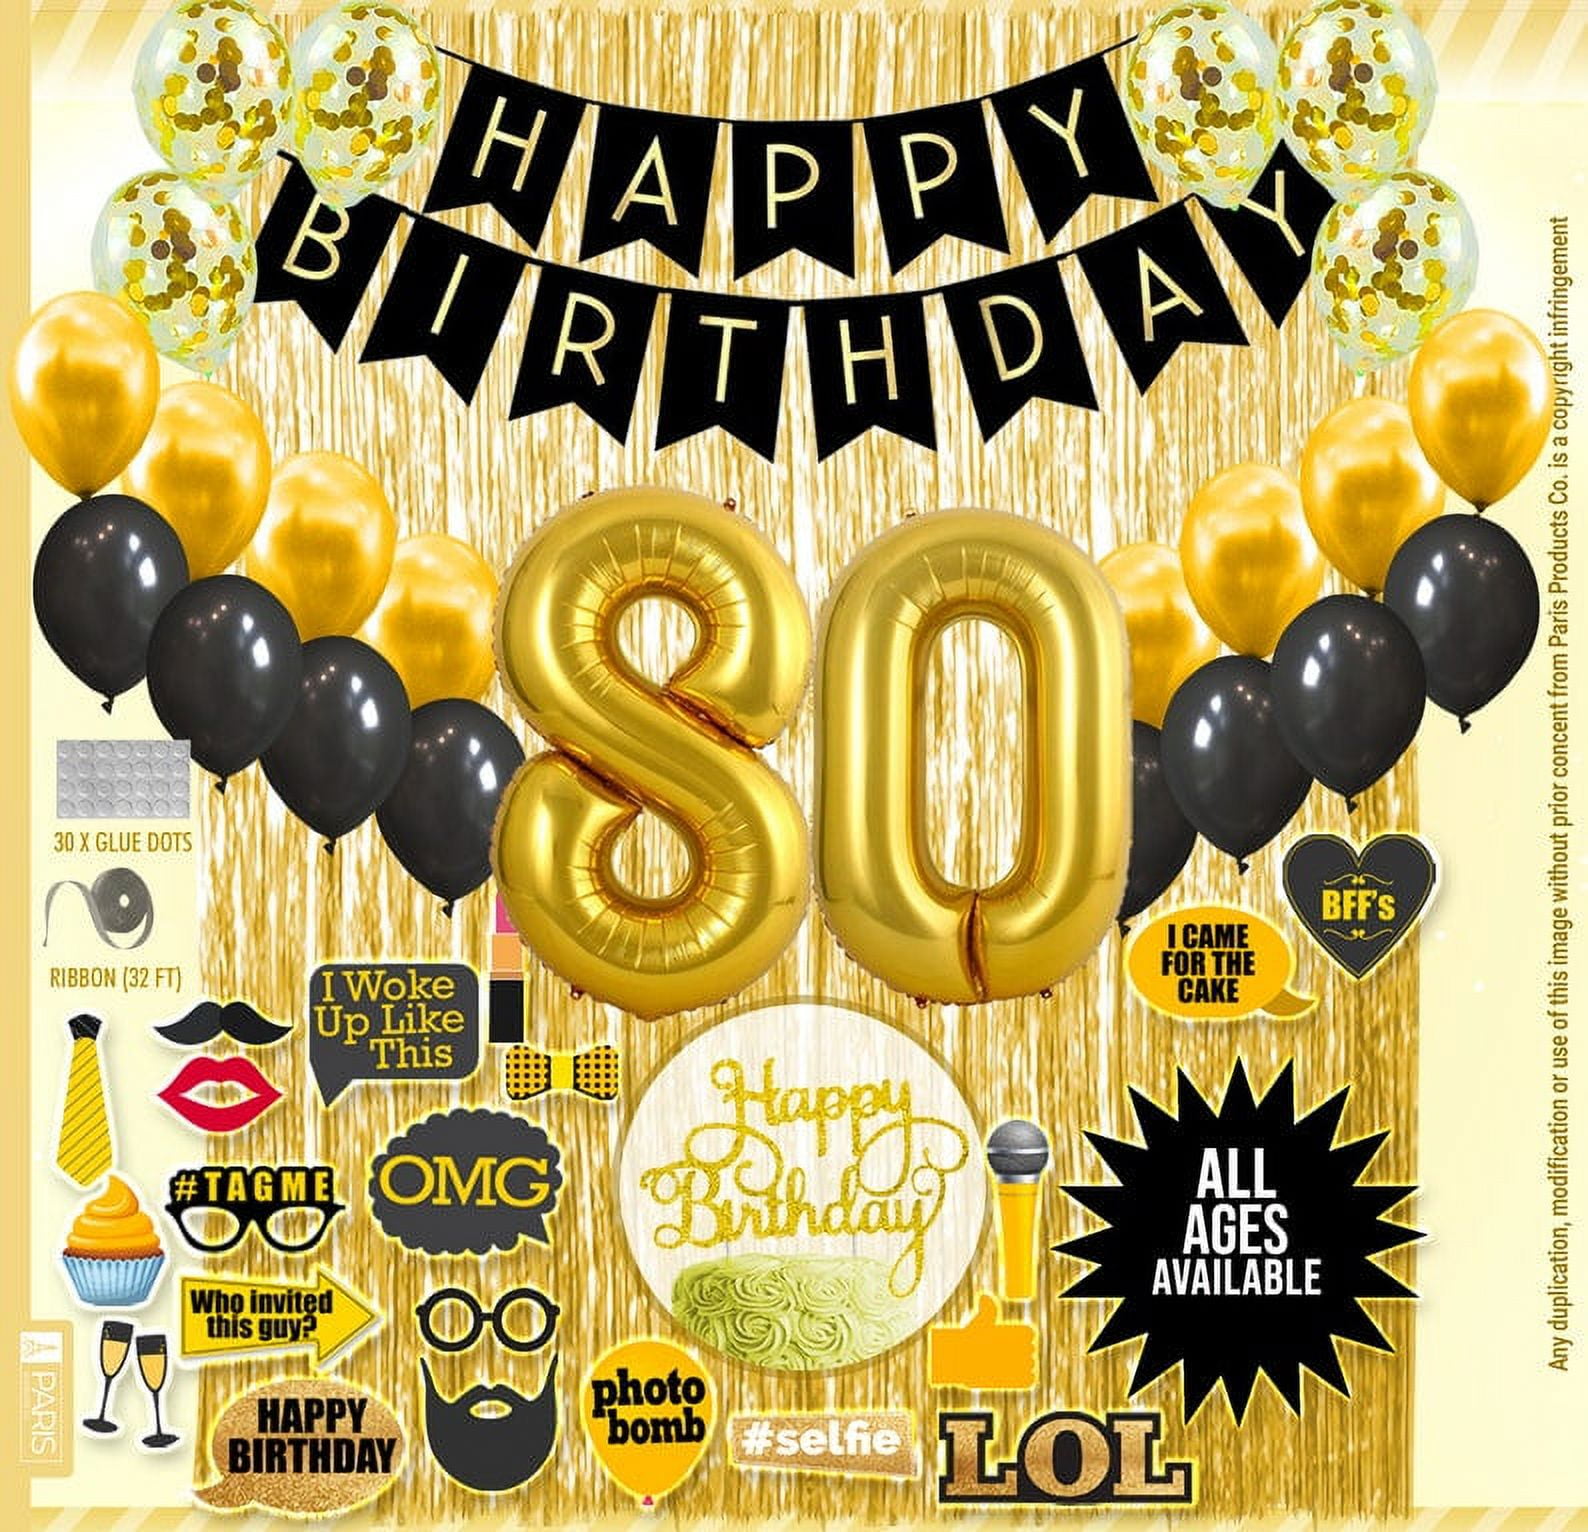 79th Birthday Decoration Black and Gold for Boy & Girl, 79th Cake Topper,  79th Party Supplies for Her and Him, 79th Birthday Photo Props 